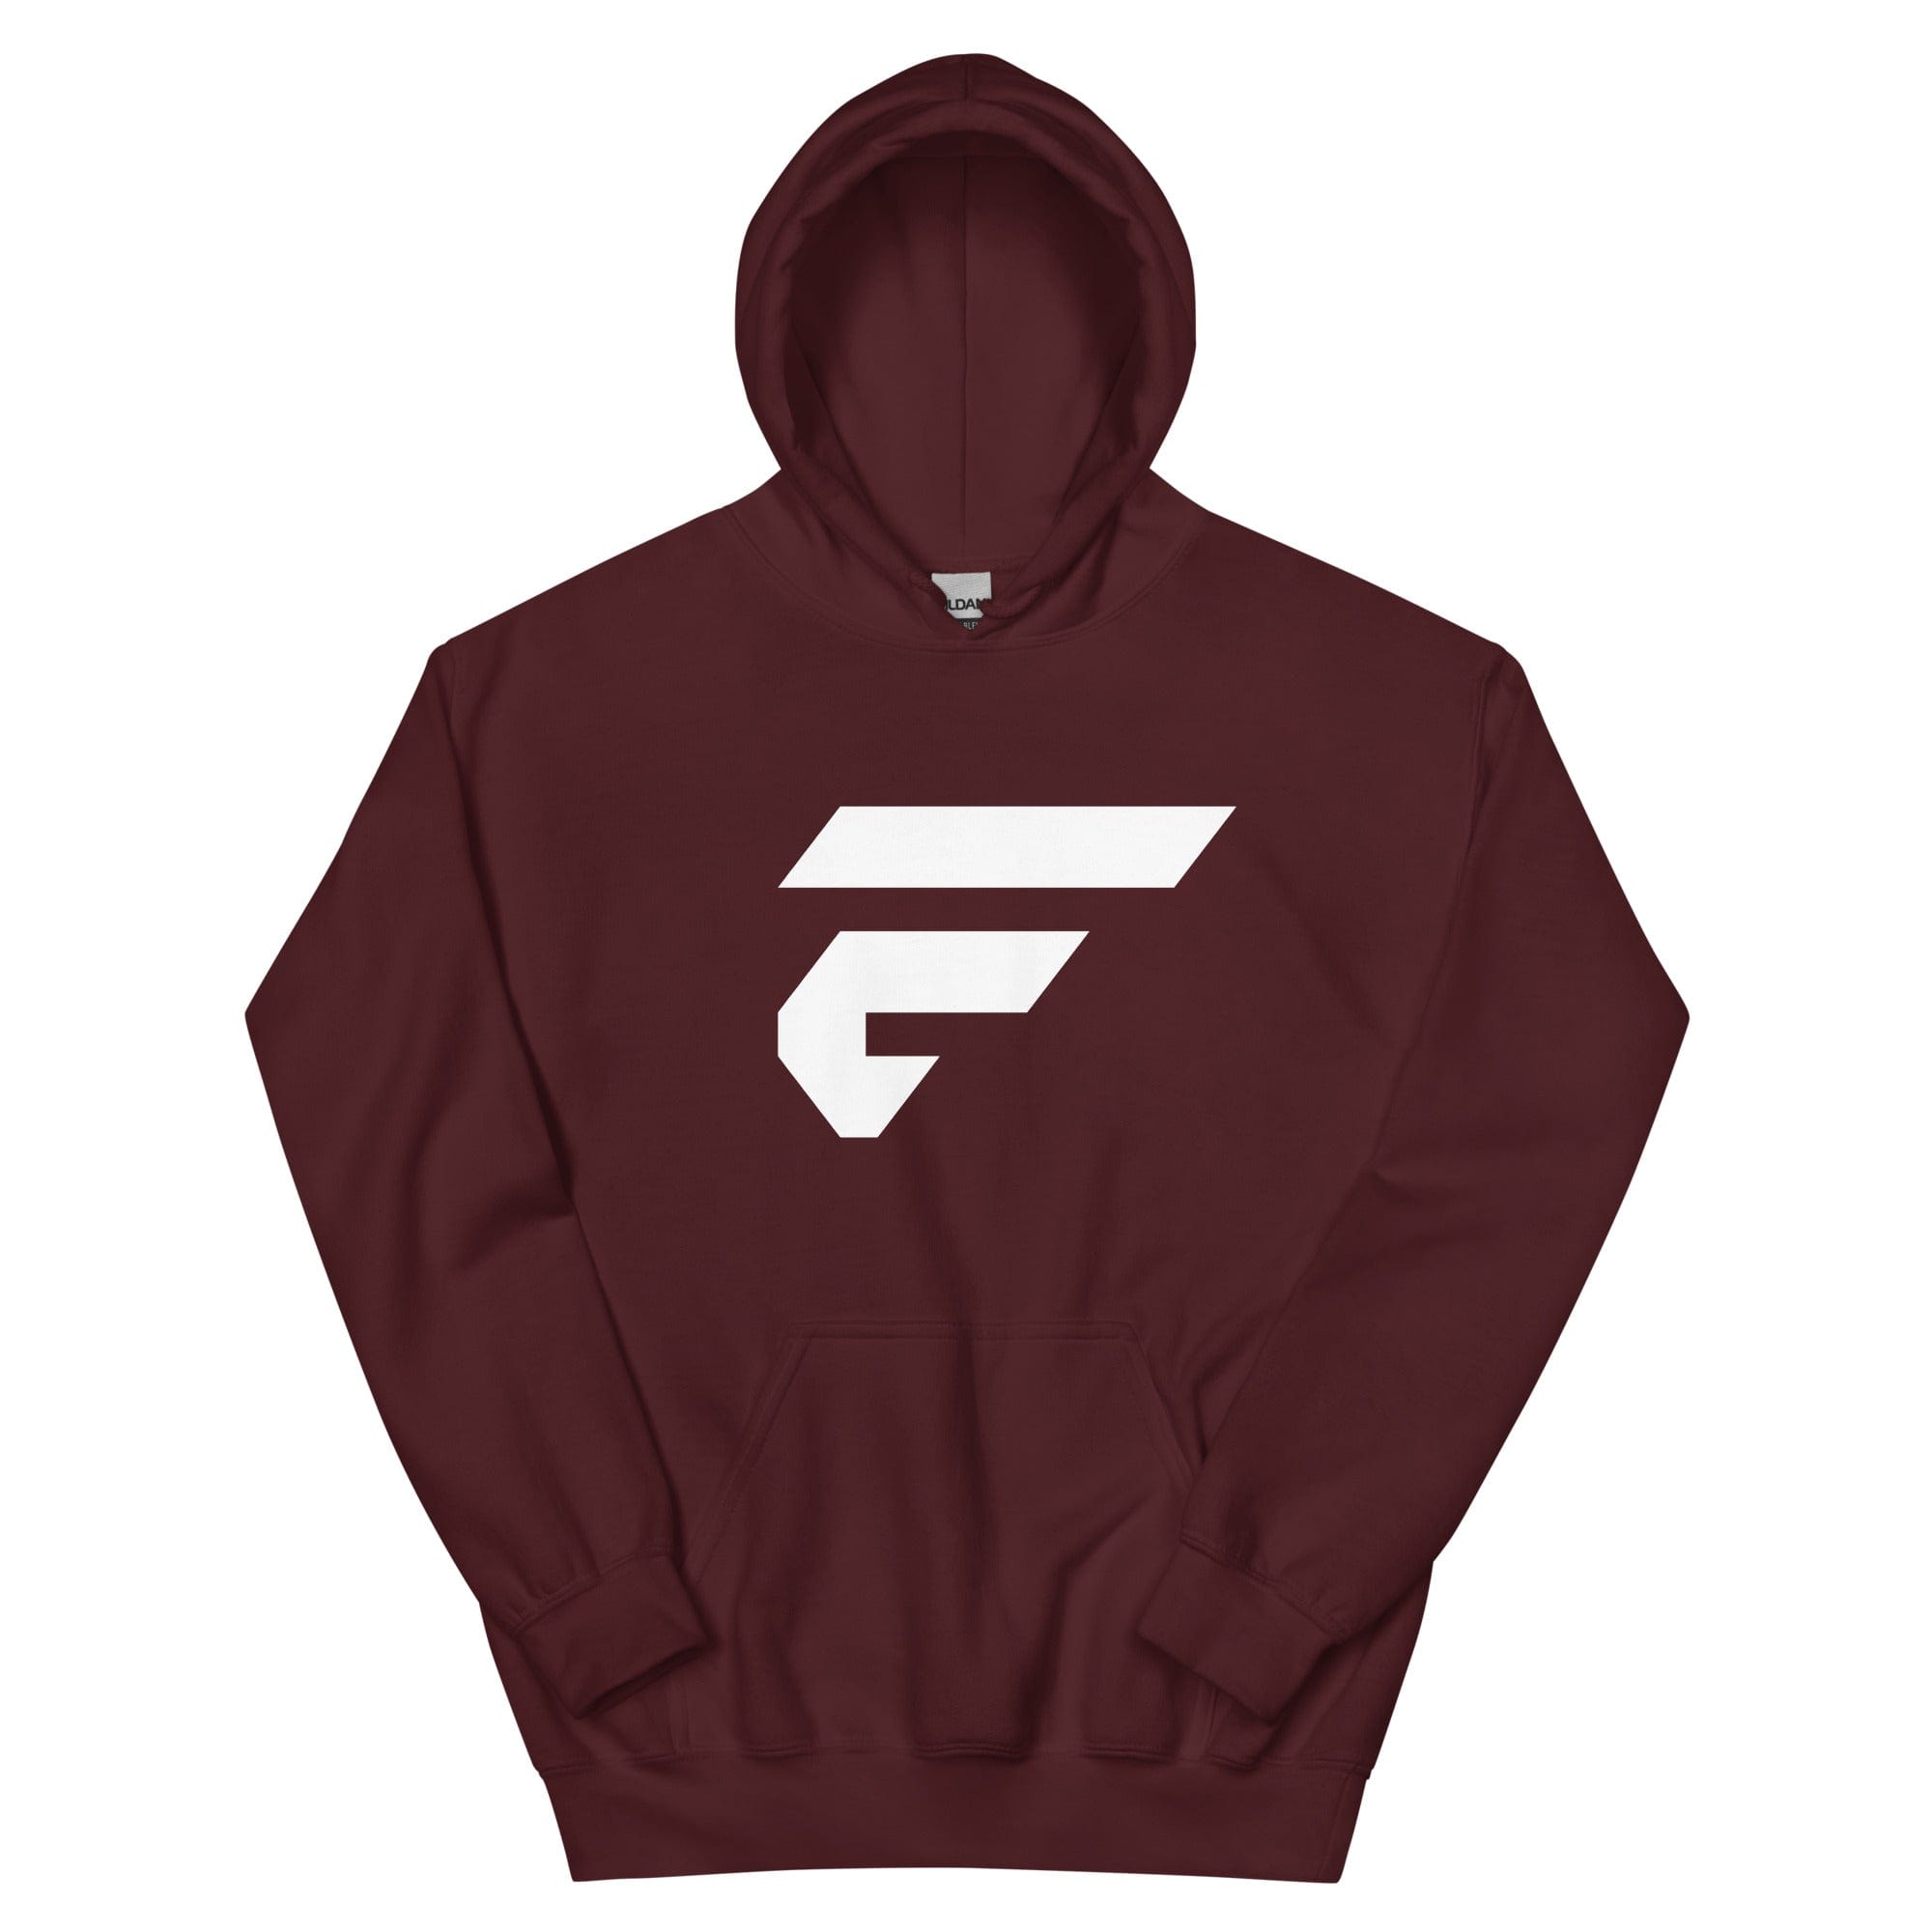 Maroon unisex cotton hoodie with Fire Cornhole F logo in white